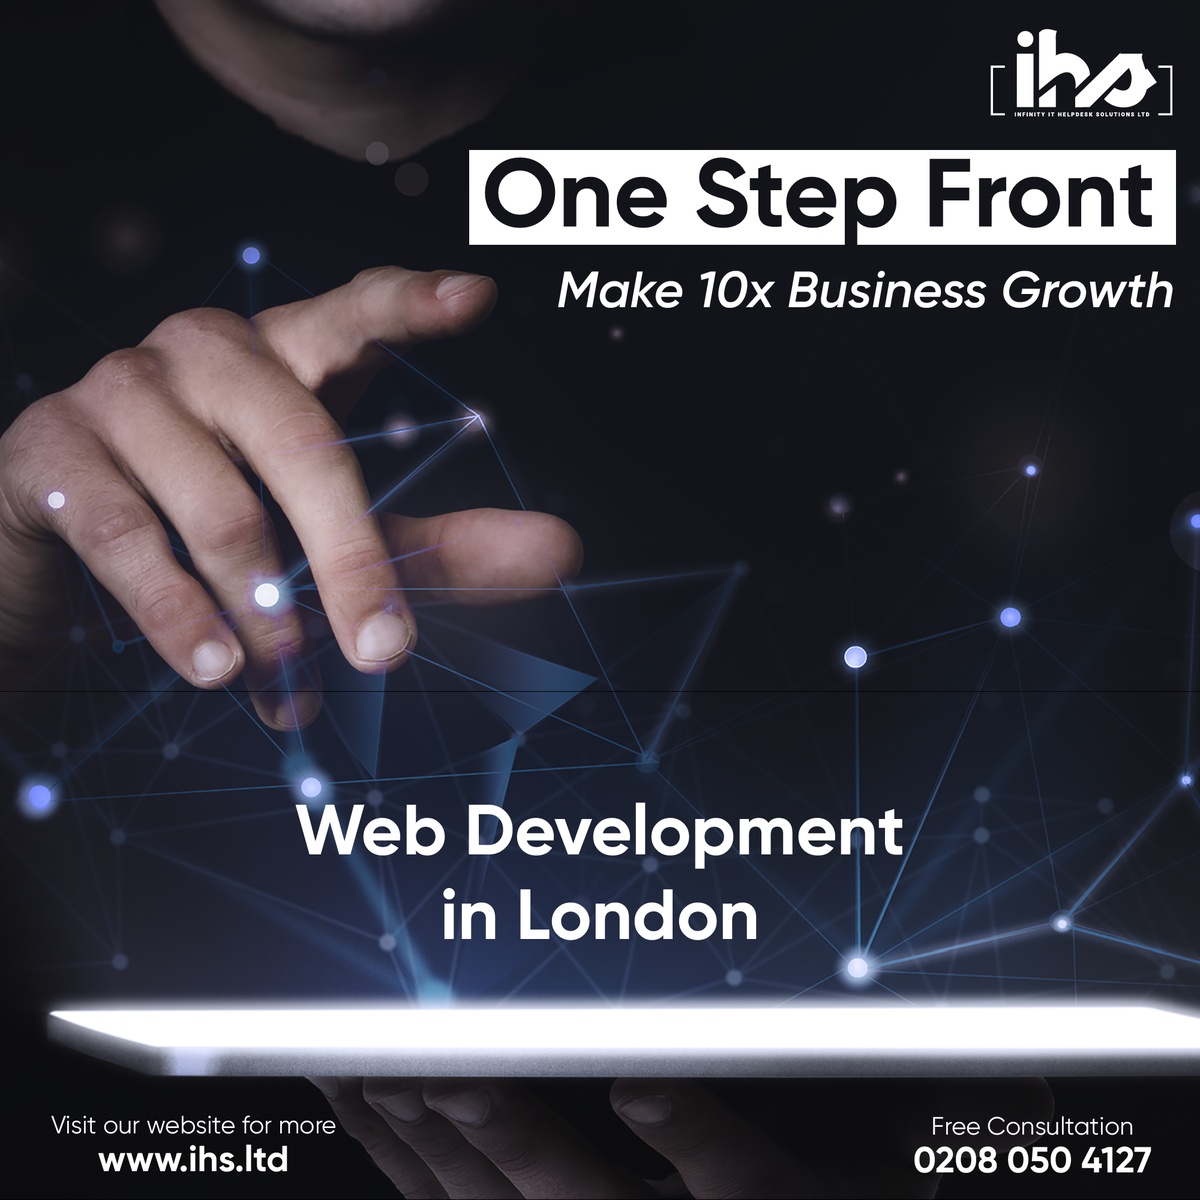 Everything You Need To Know About Web Design And Web Development Company In London